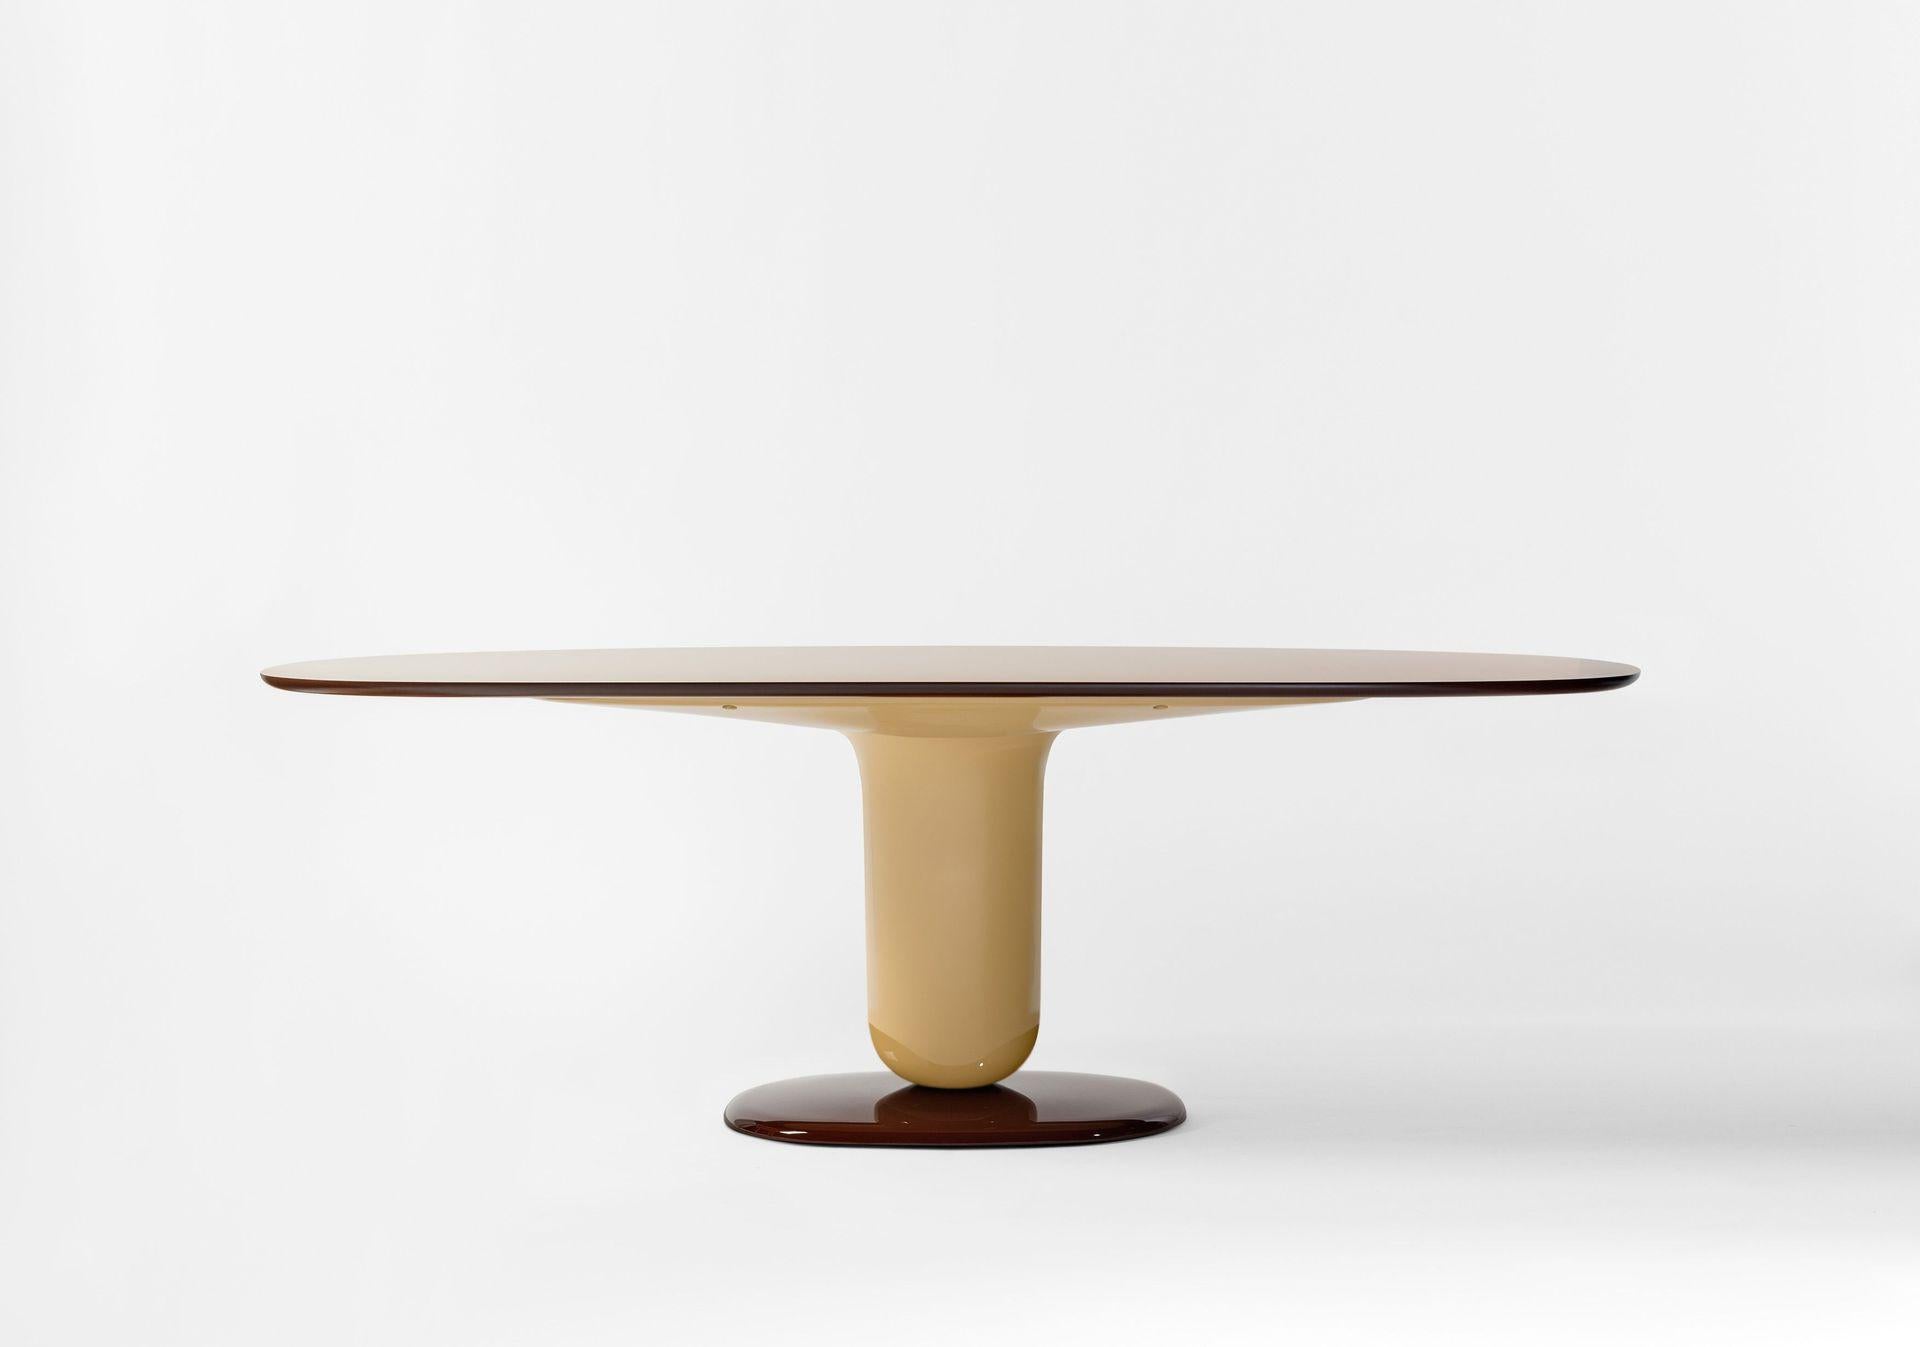 Explorer 5B dining table by Jaime Hayon
Dimensions: D 100 x W 220 x H 74 cm 
Materials: Lacquered fiberglass body. Solid turned wooden legs and lacquered. Painted glass tabletop.
Available in sizes Explorer 4 (Diameter 130 cm) and Explorer 5A